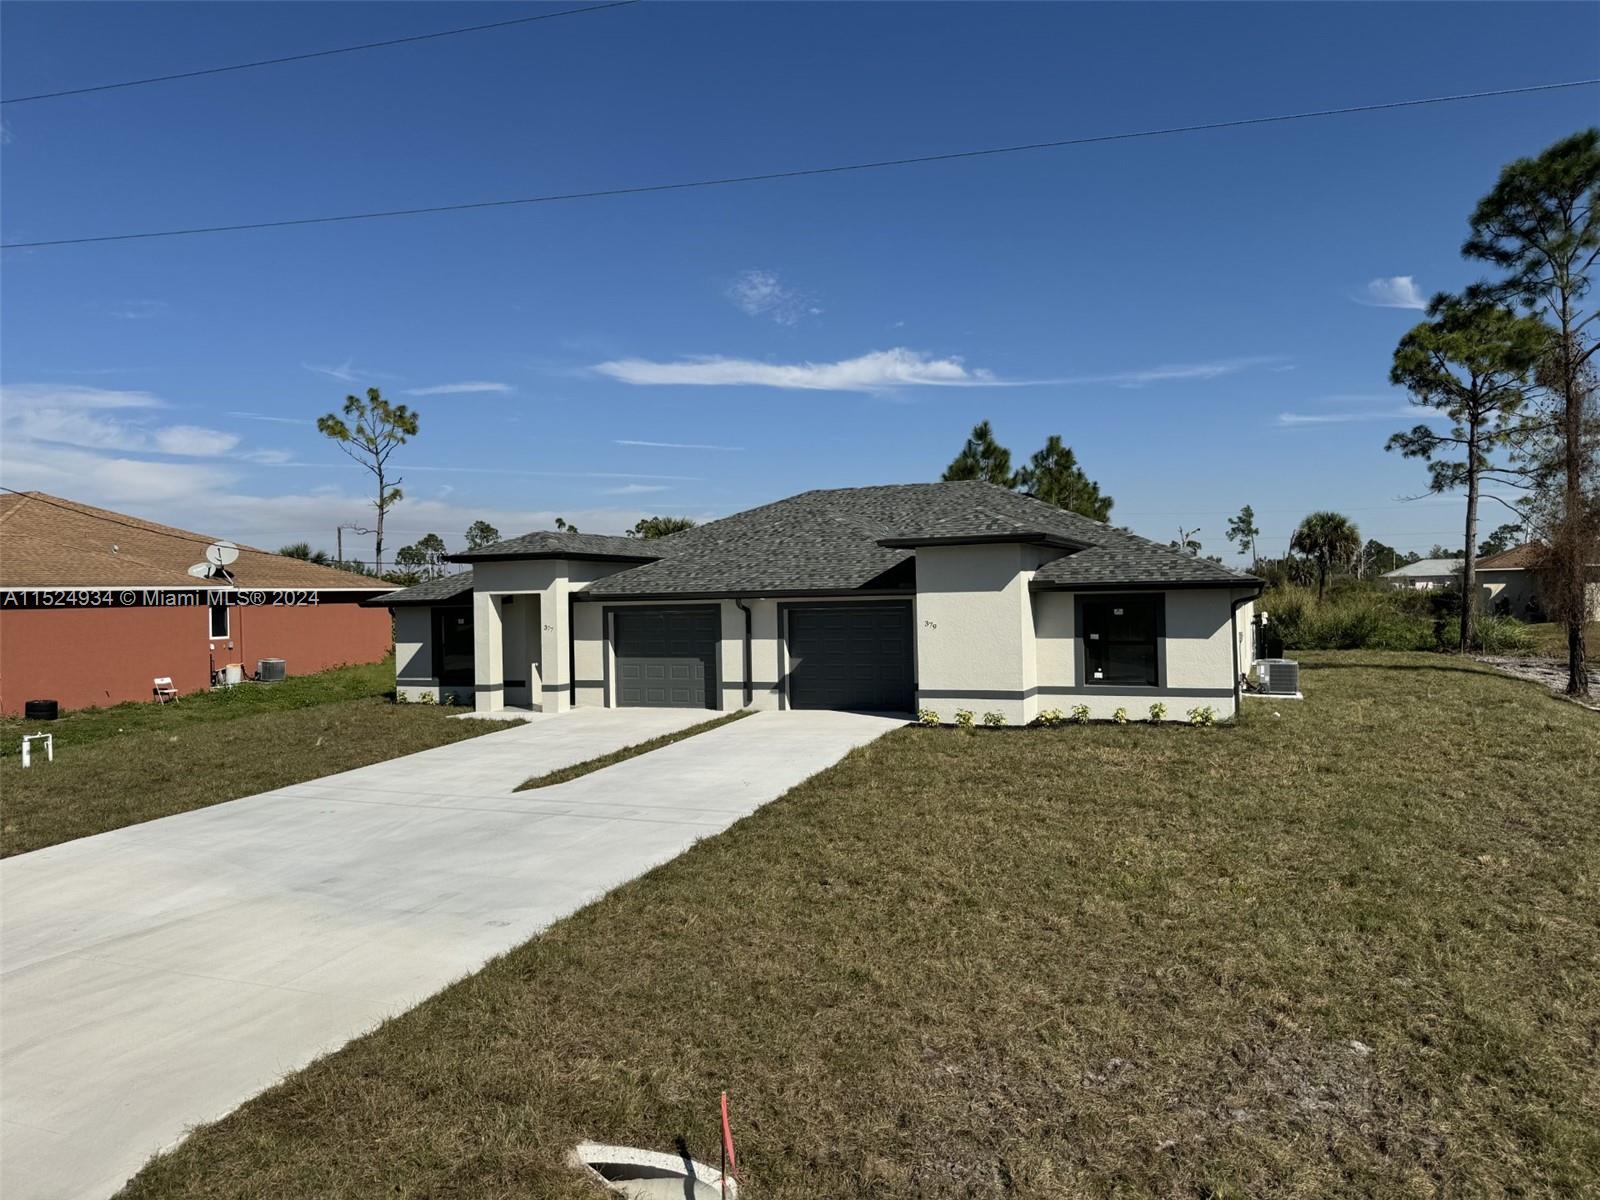 51165118 30th St Sw, Lehigh Acres, Lee County, Florida - 6 Bedrooms  
4 Bathrooms - 